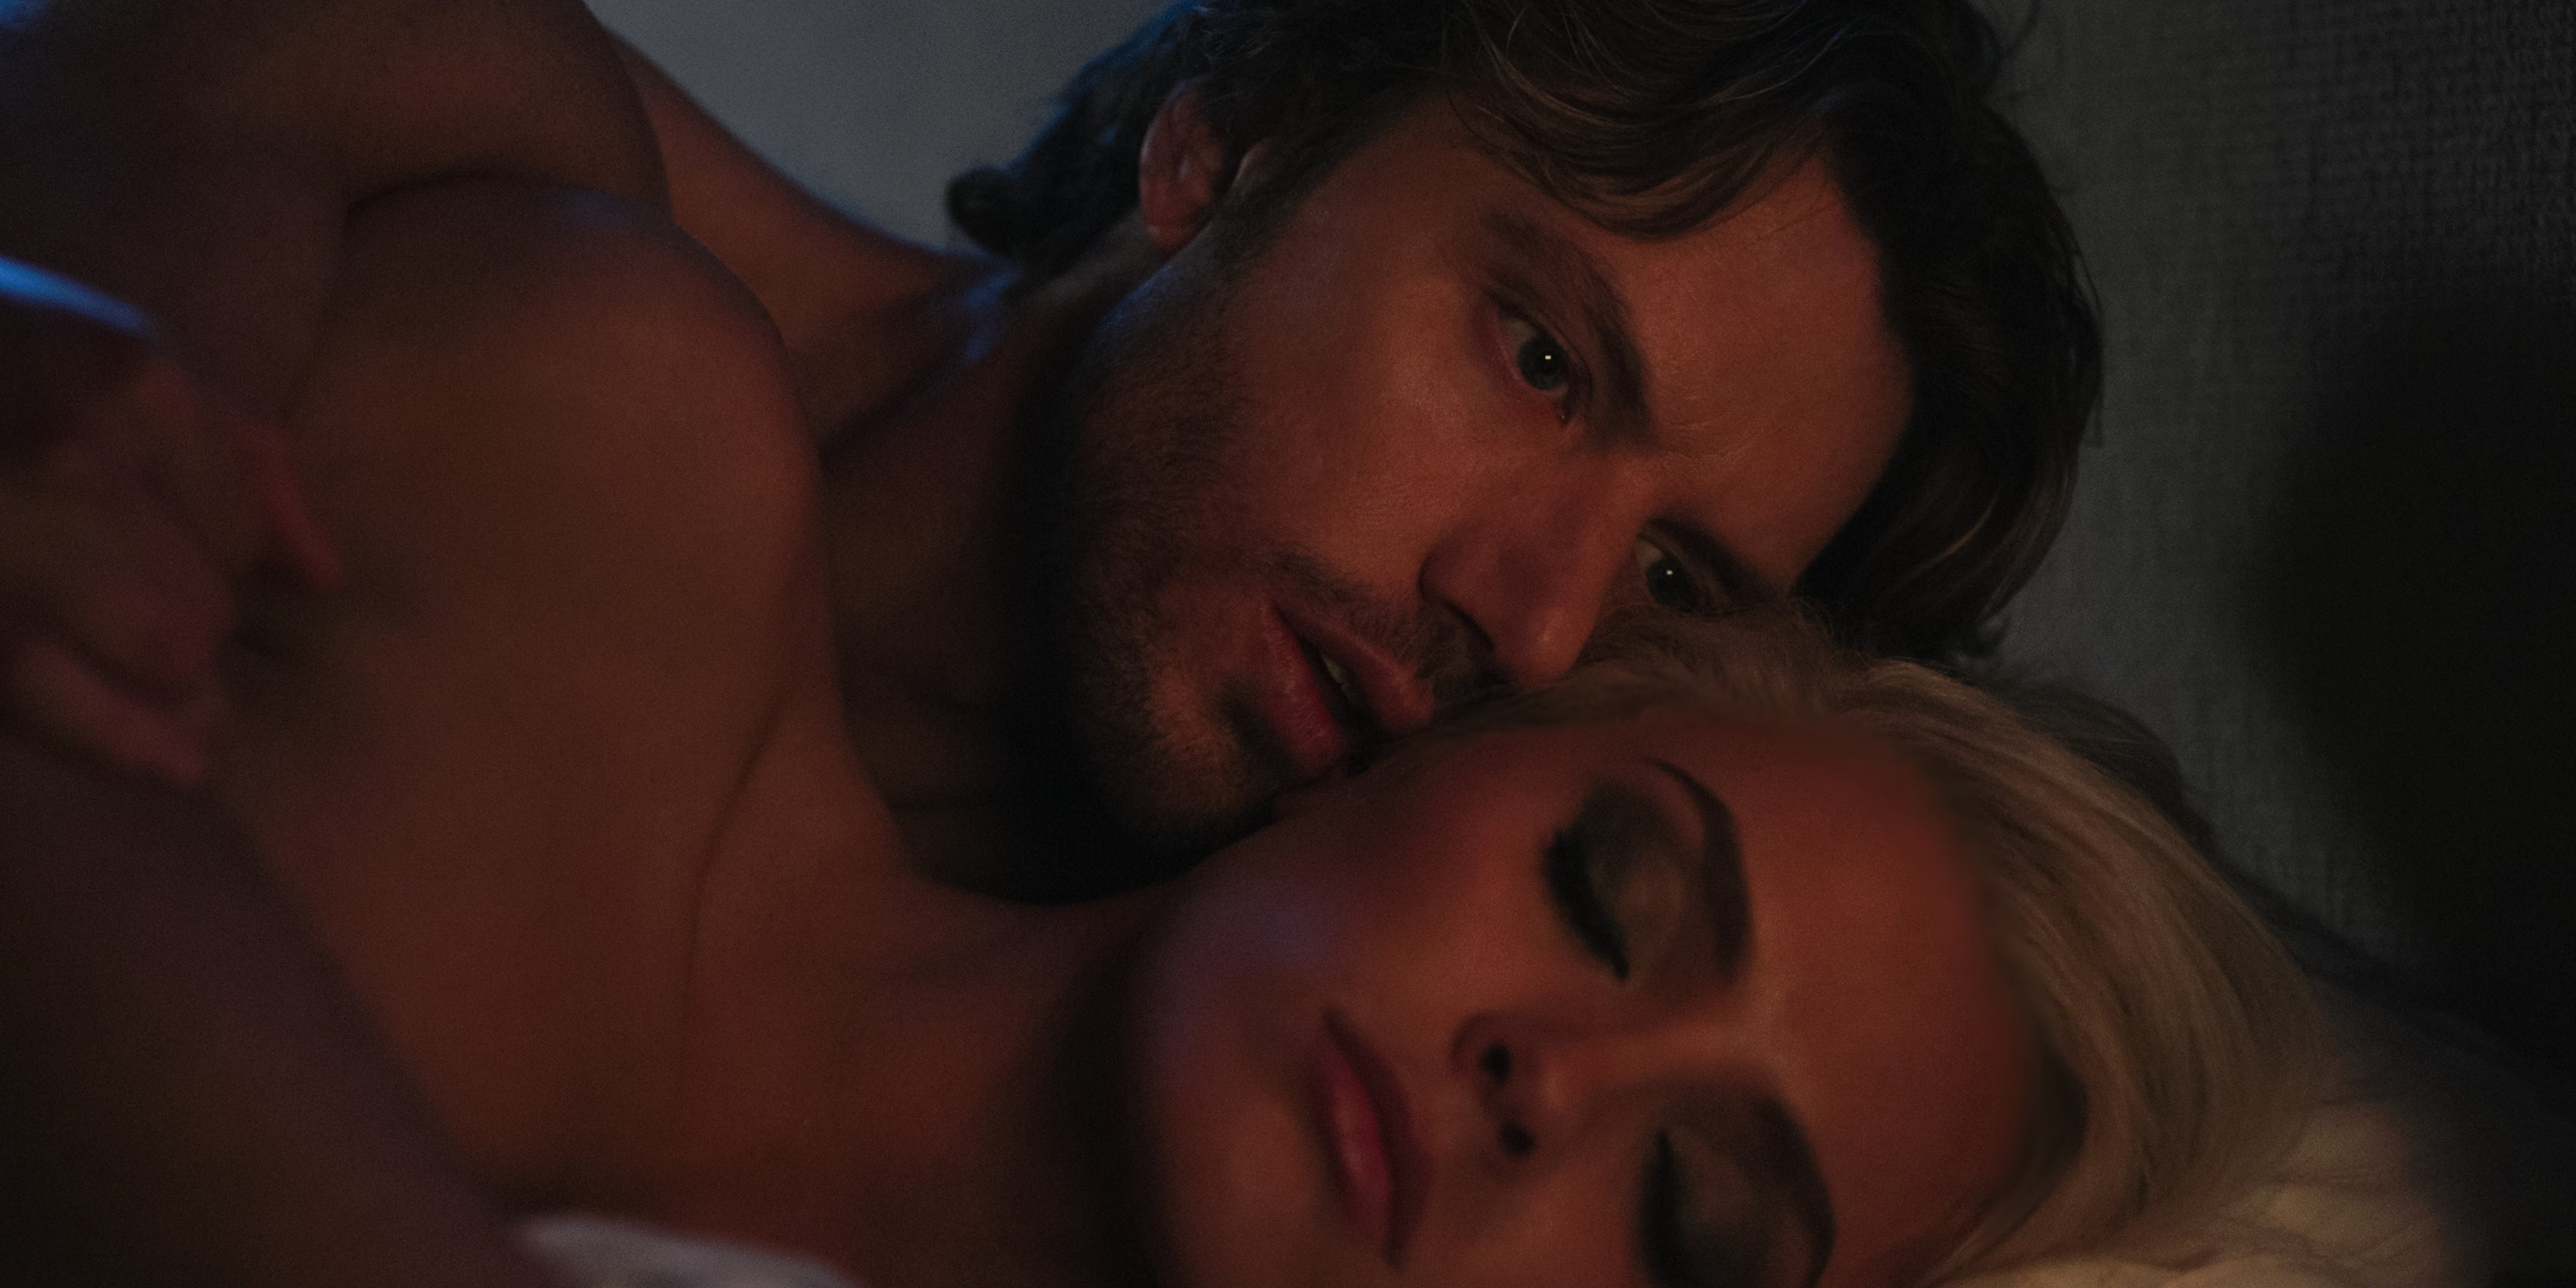 Sex/Life on Netflix Season 2s sex scenes receive a detailed assessment. picture image